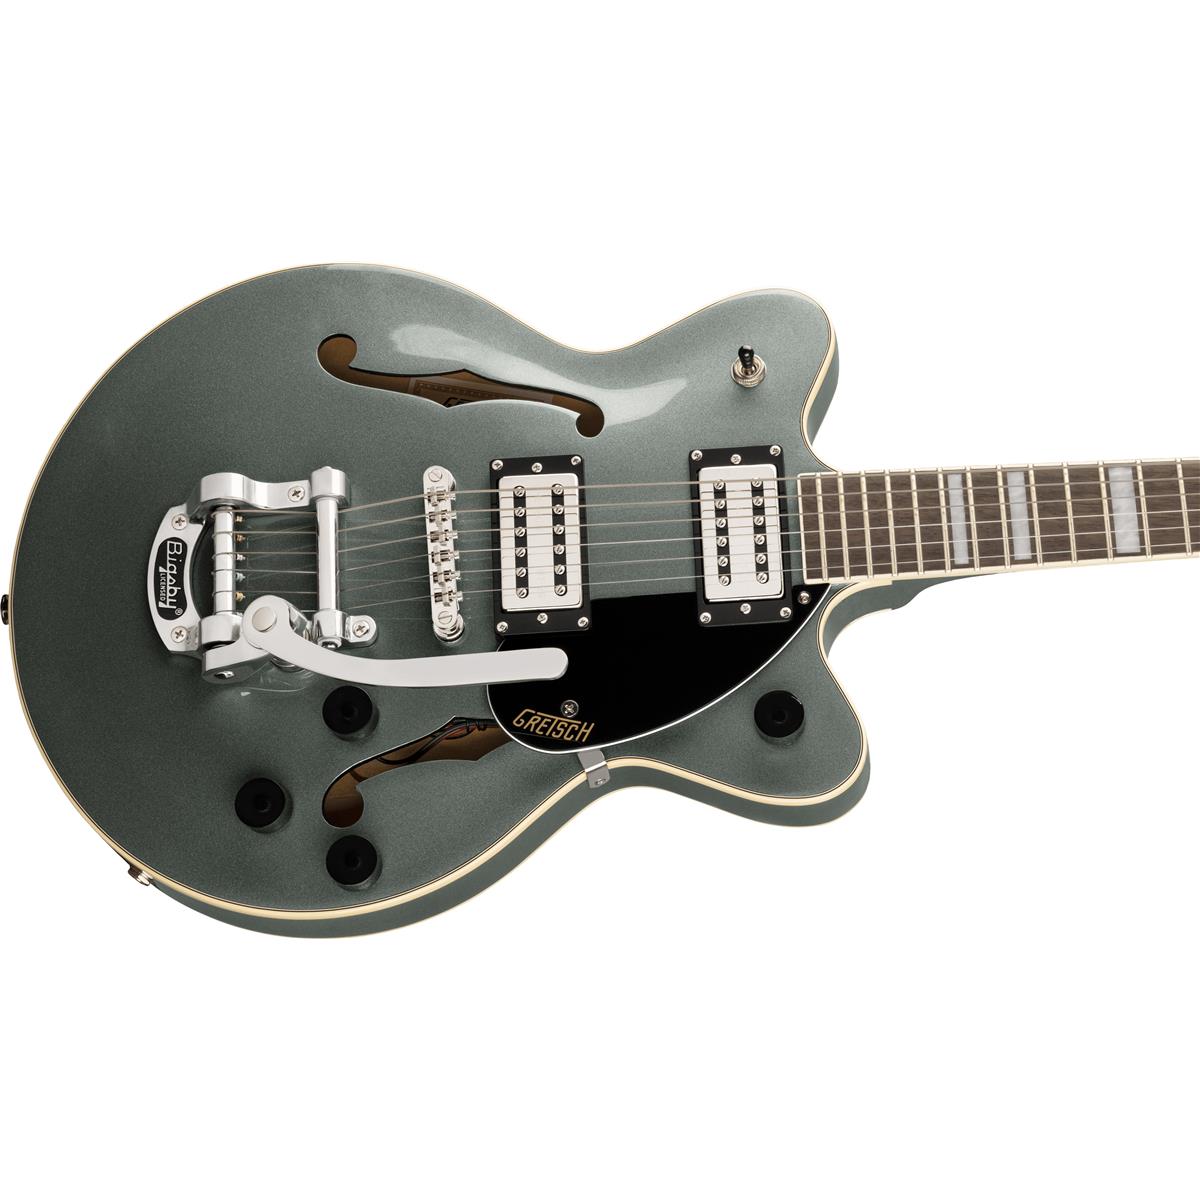 Gretsch G2655T Streamliner Center Block Jr. Double-Cut Bigsby Electric Guitar $259 + free s/h